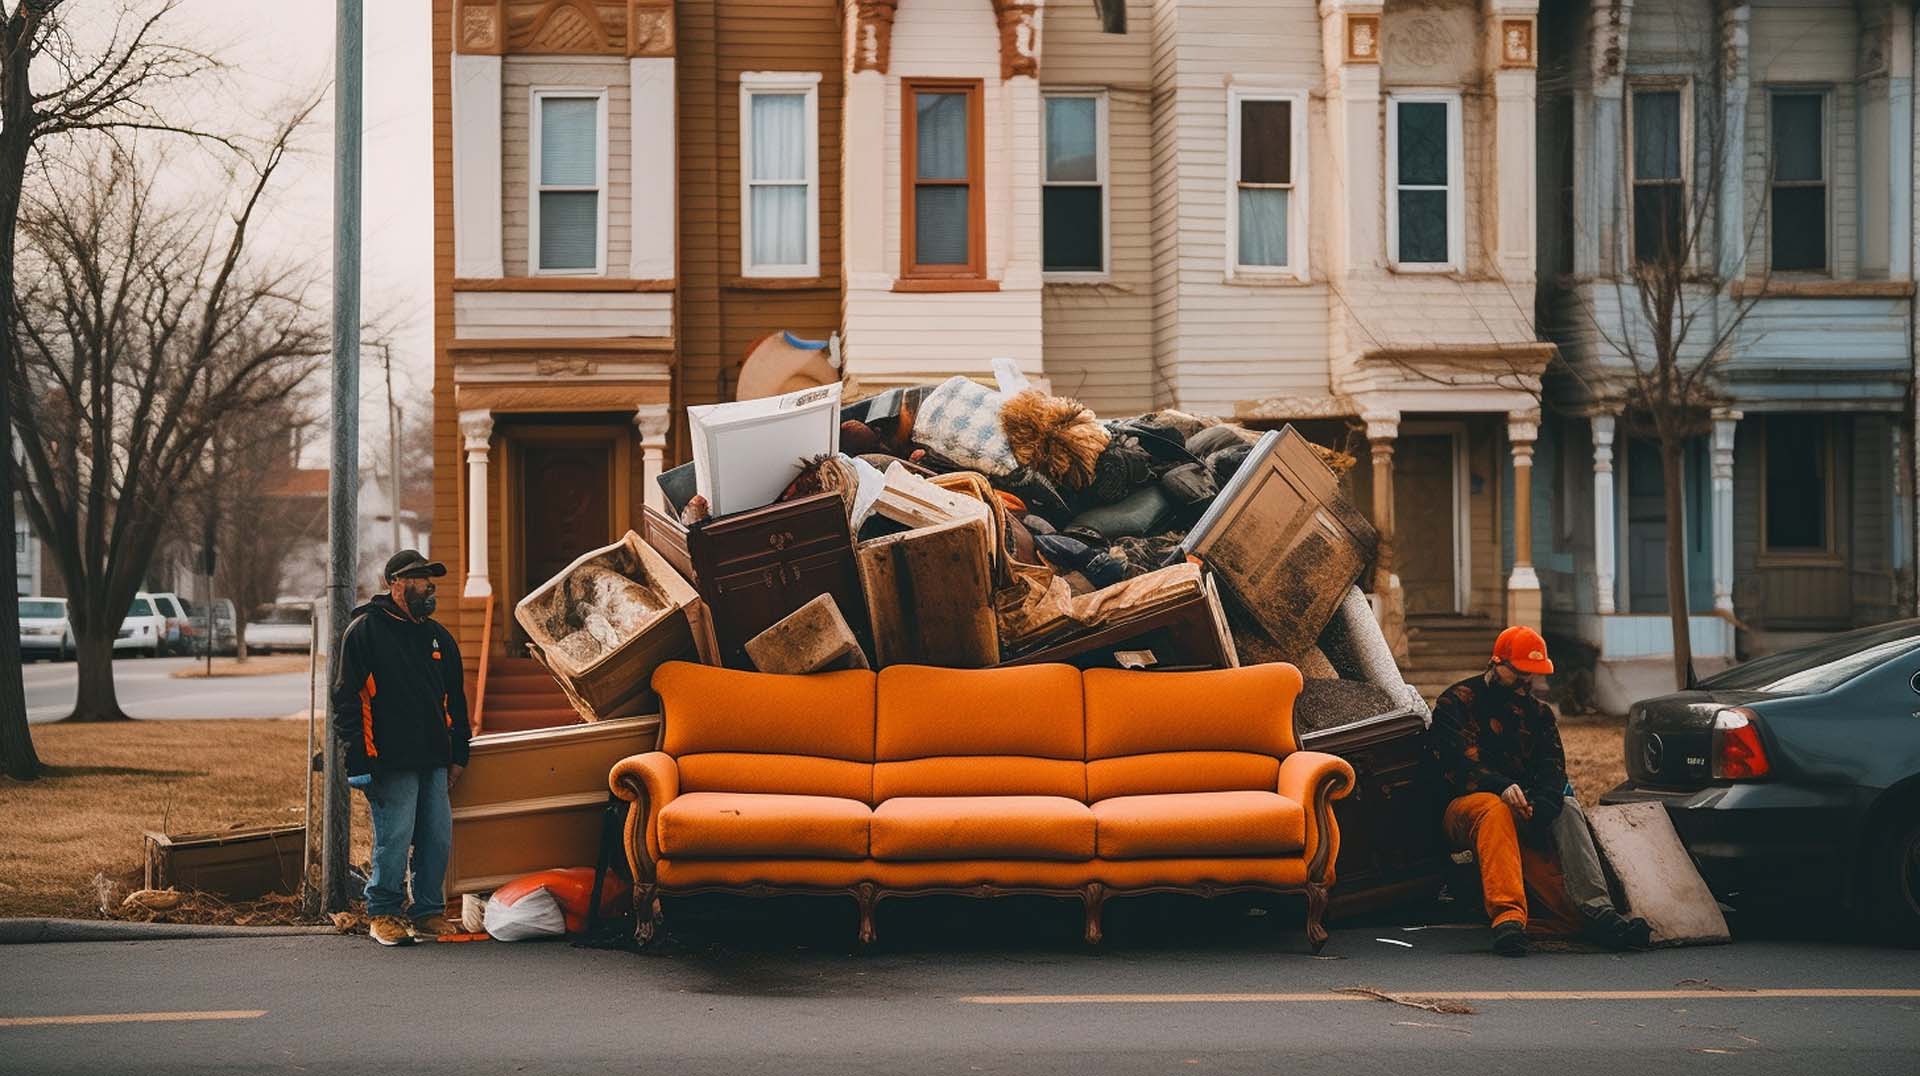 Residential Junk Removal Services in Duncan